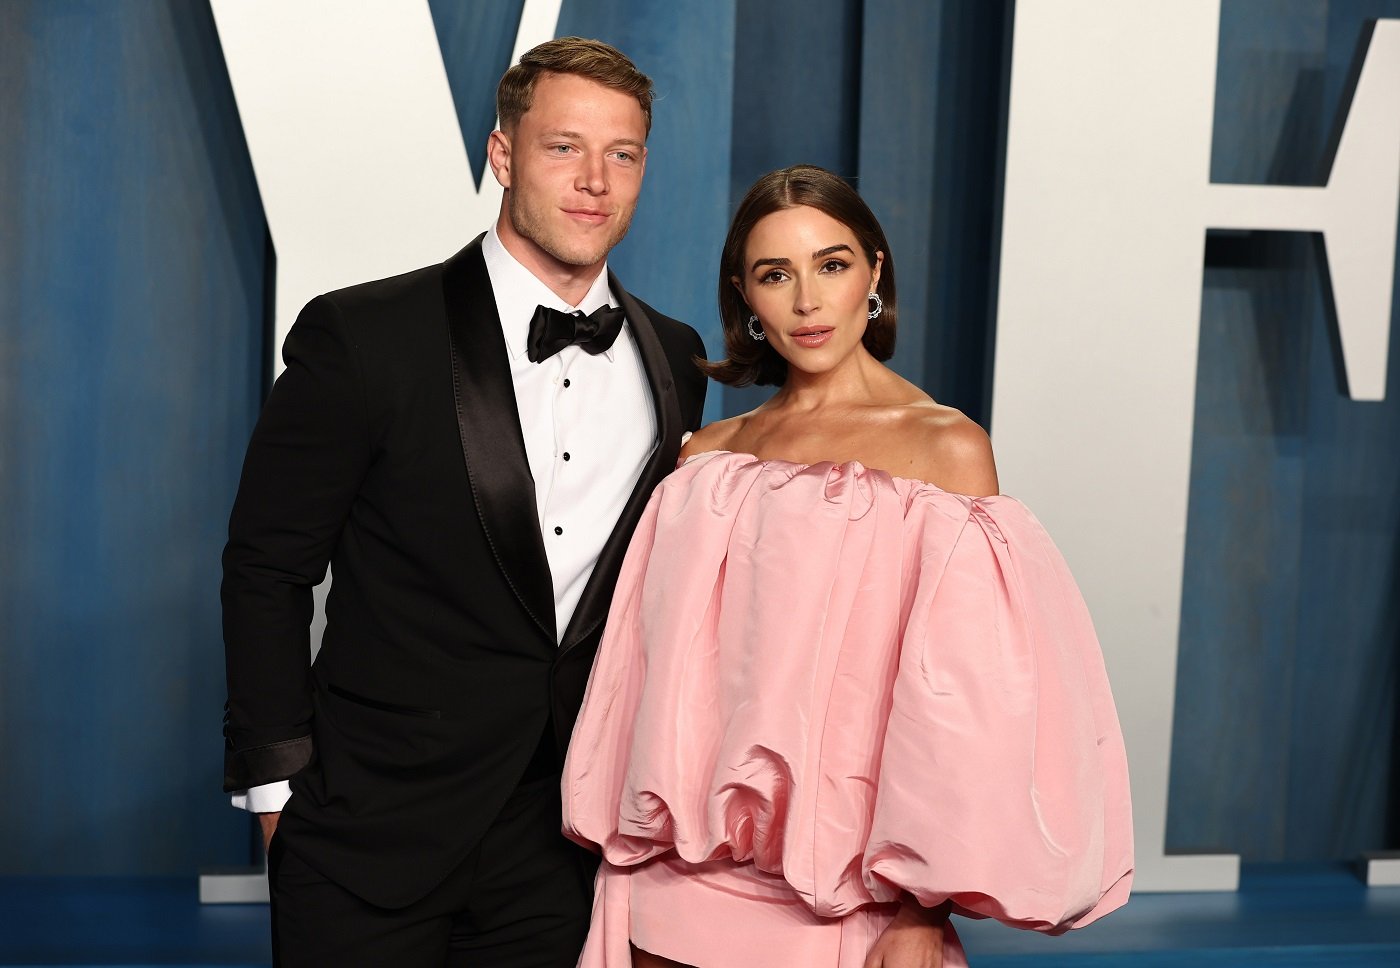 Christian McCaffrey and Olivia Culpo attend the 2022 Vanity Fair Oscar Party hosted by Radhika Jones at Wallis Annenberg Center for the Performing Arts on March 27, 2022